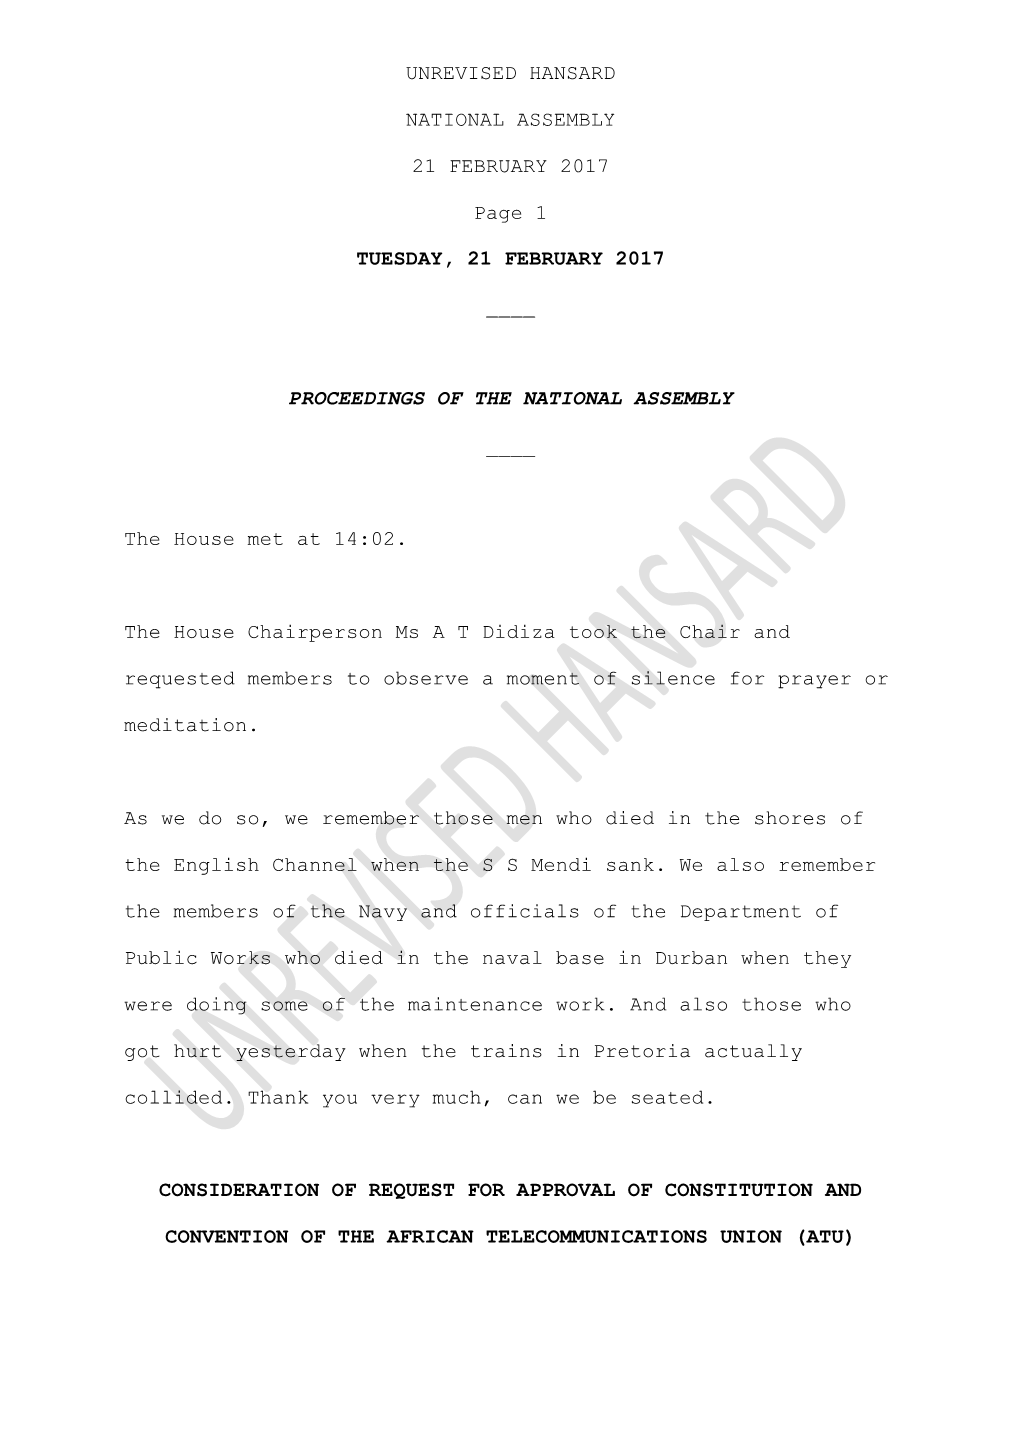 Consideration of Request for Approval of Constitution And